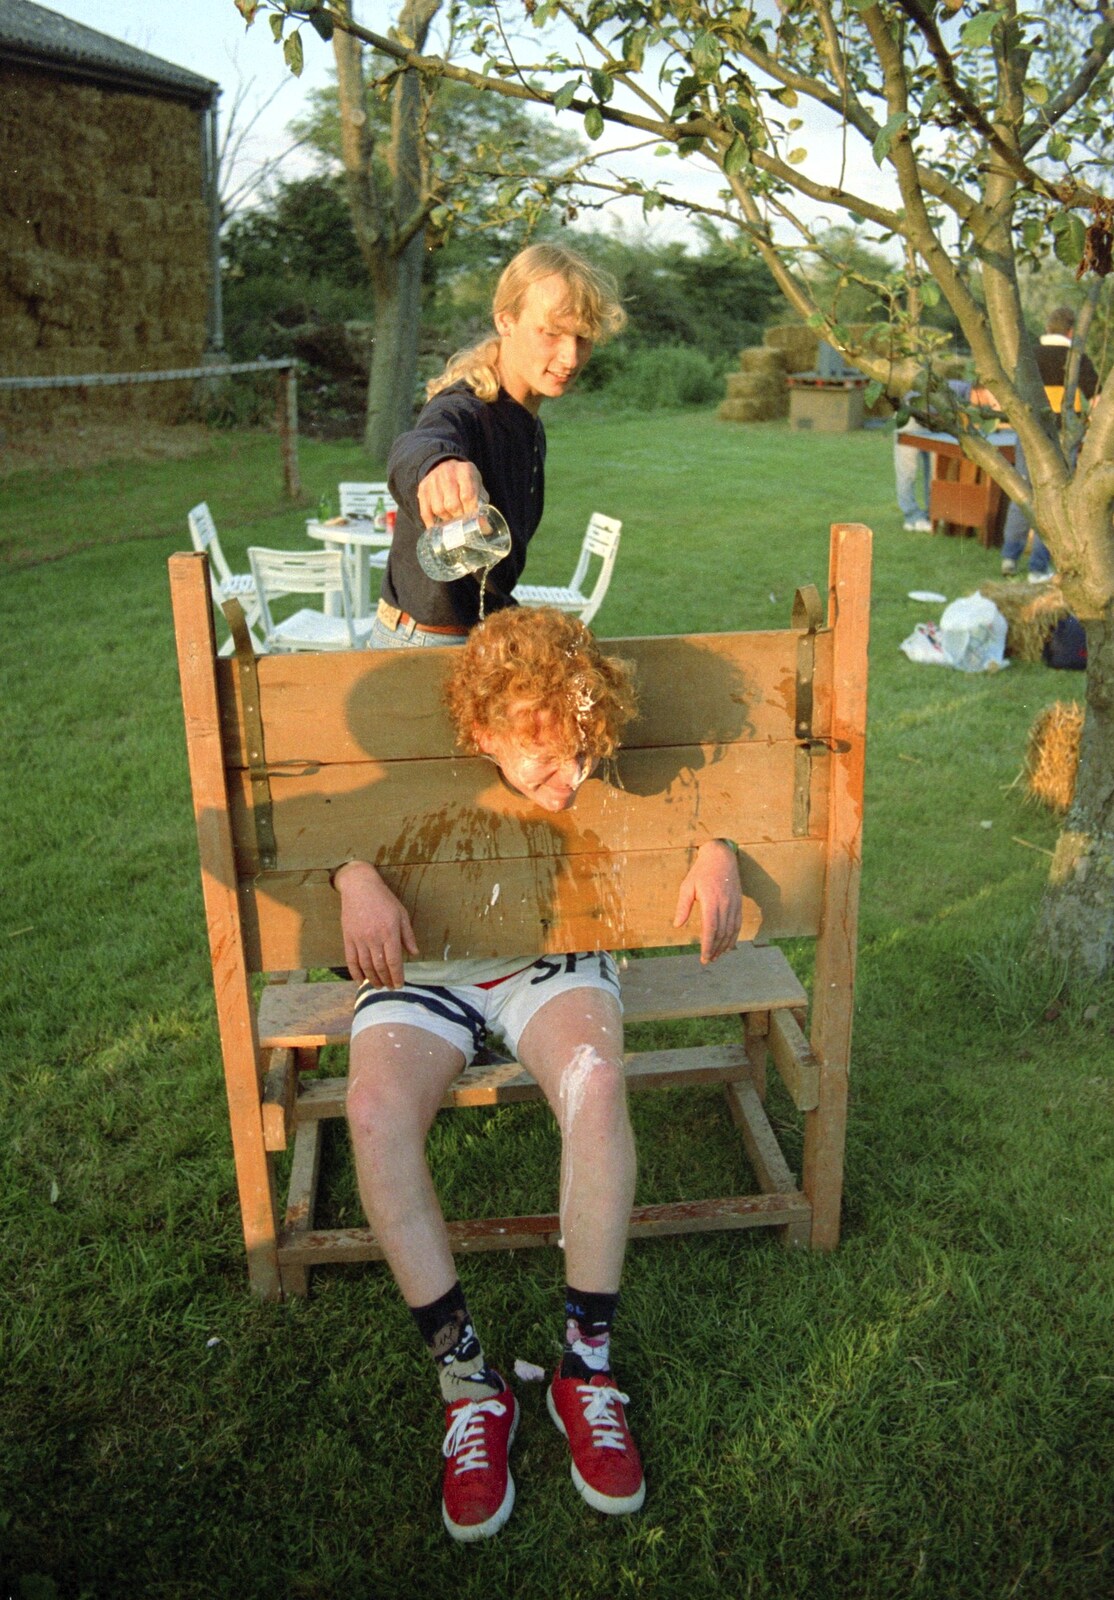 Jimmy pours water on Wavy's head from Bromestock 1 and a Mortlock Barbeque, Brome and Thrandeston, Suffolk - 24th June 1997